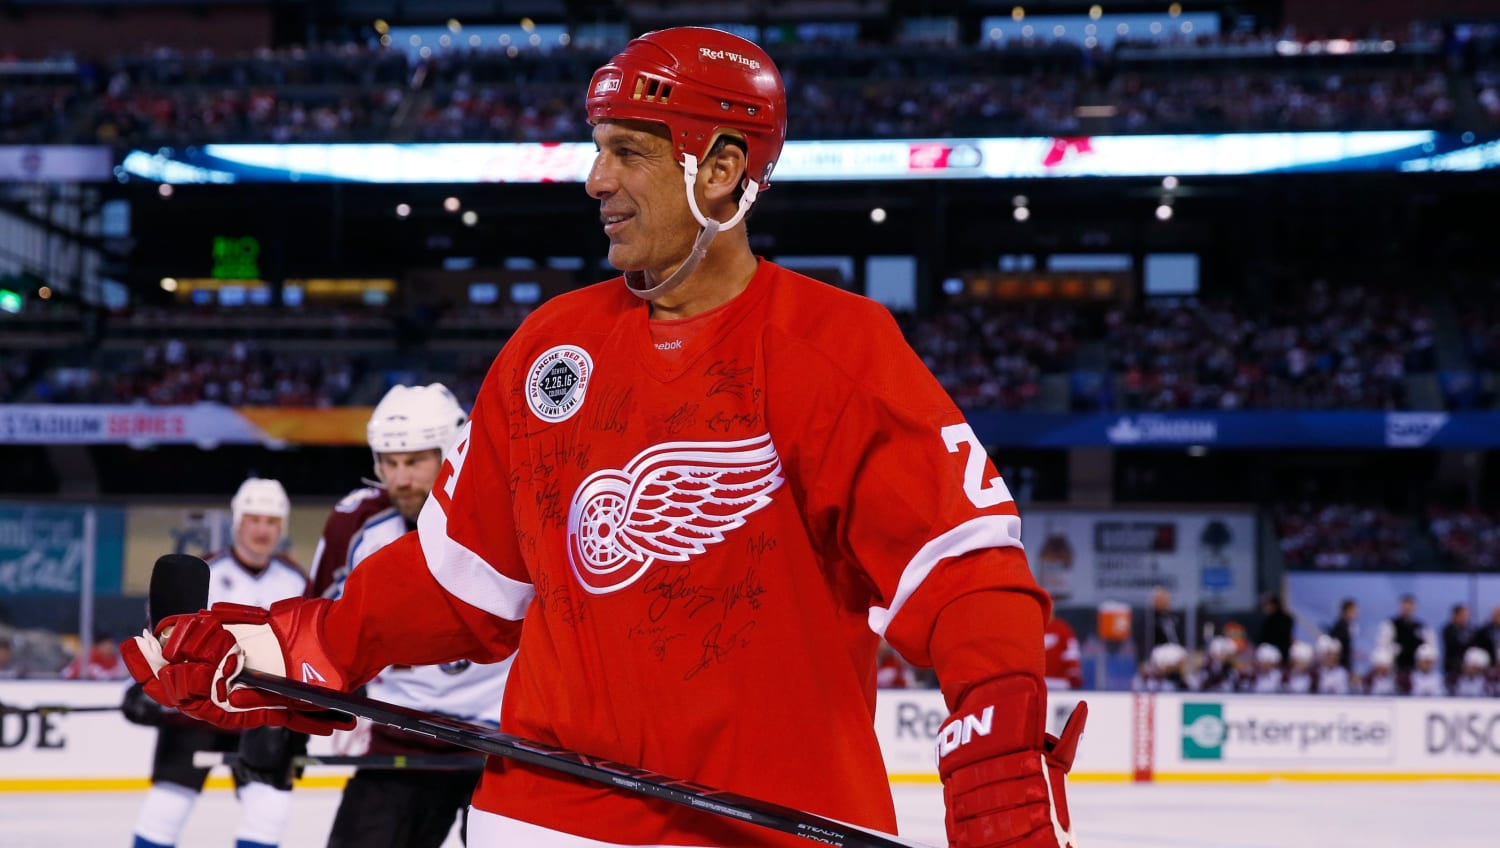 Chris Chelios says he drank beer on bench after Mike Babcock benched him at Winter Classic